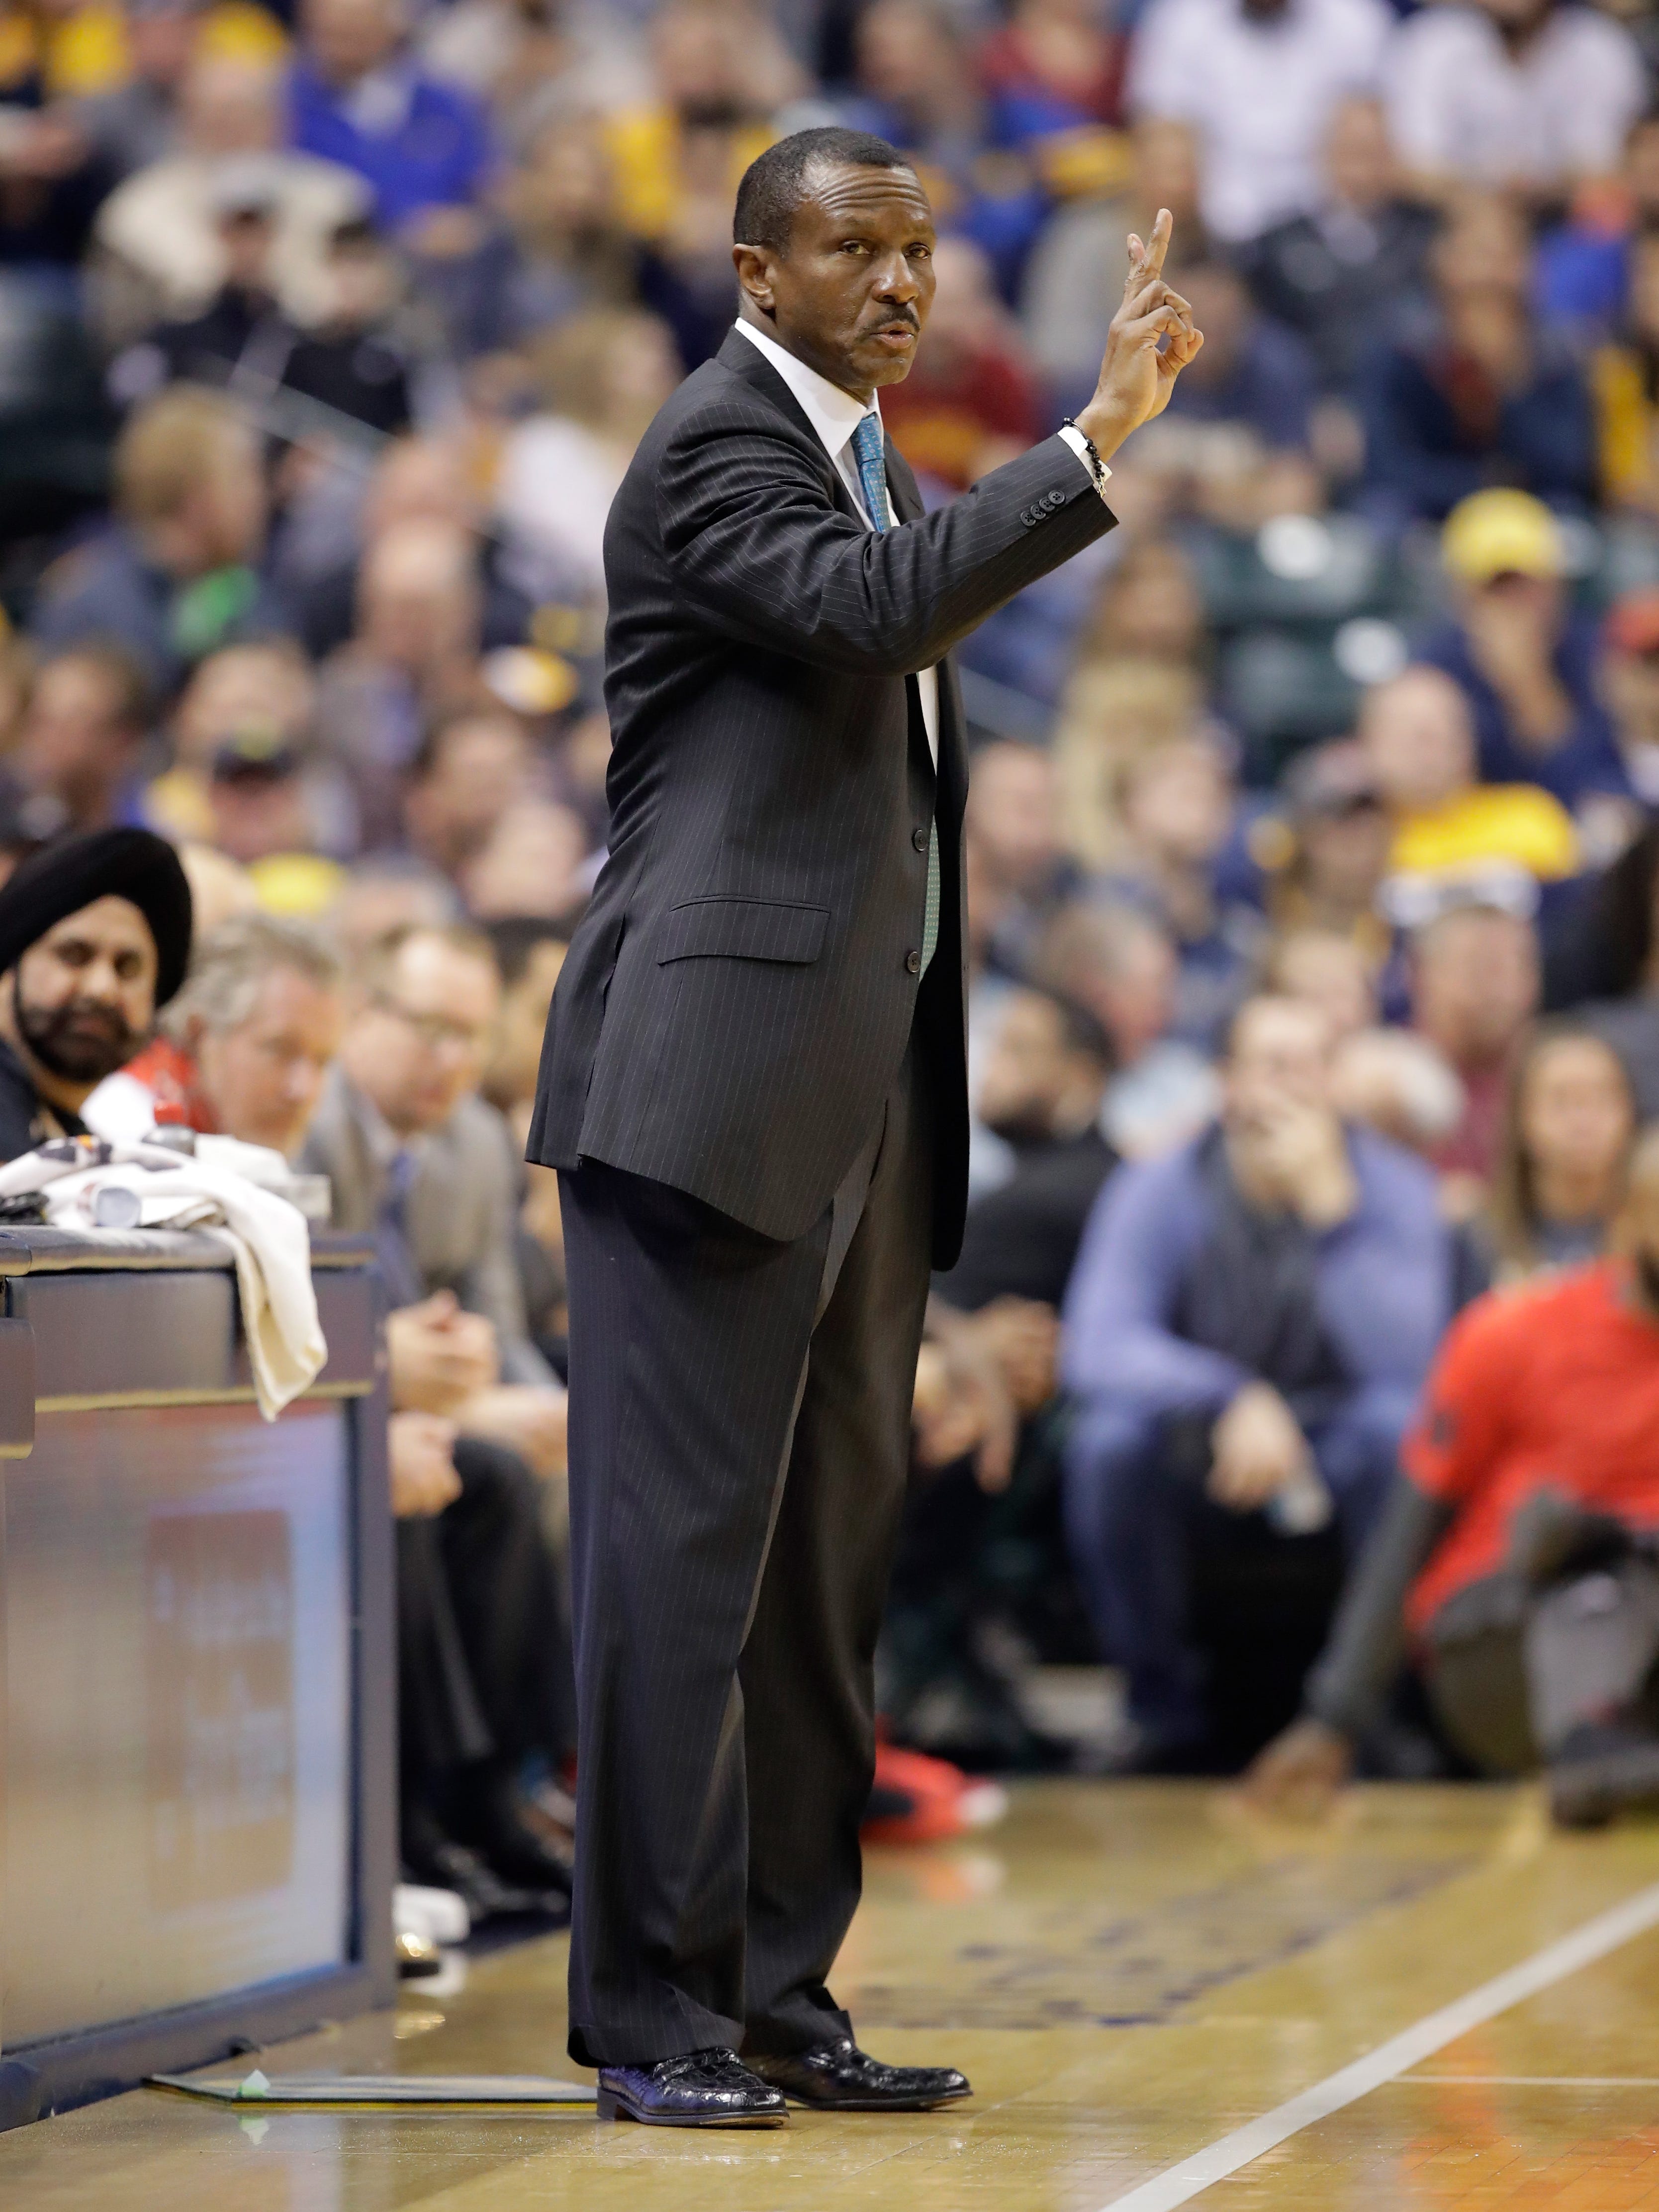 Dwane Casey the head coach of the Toronto Raptors gives instructions to his team against the Indiana Pacers at Bankers Life Fieldhouse on April 4, 2017 in Indianapolis, Indiana.